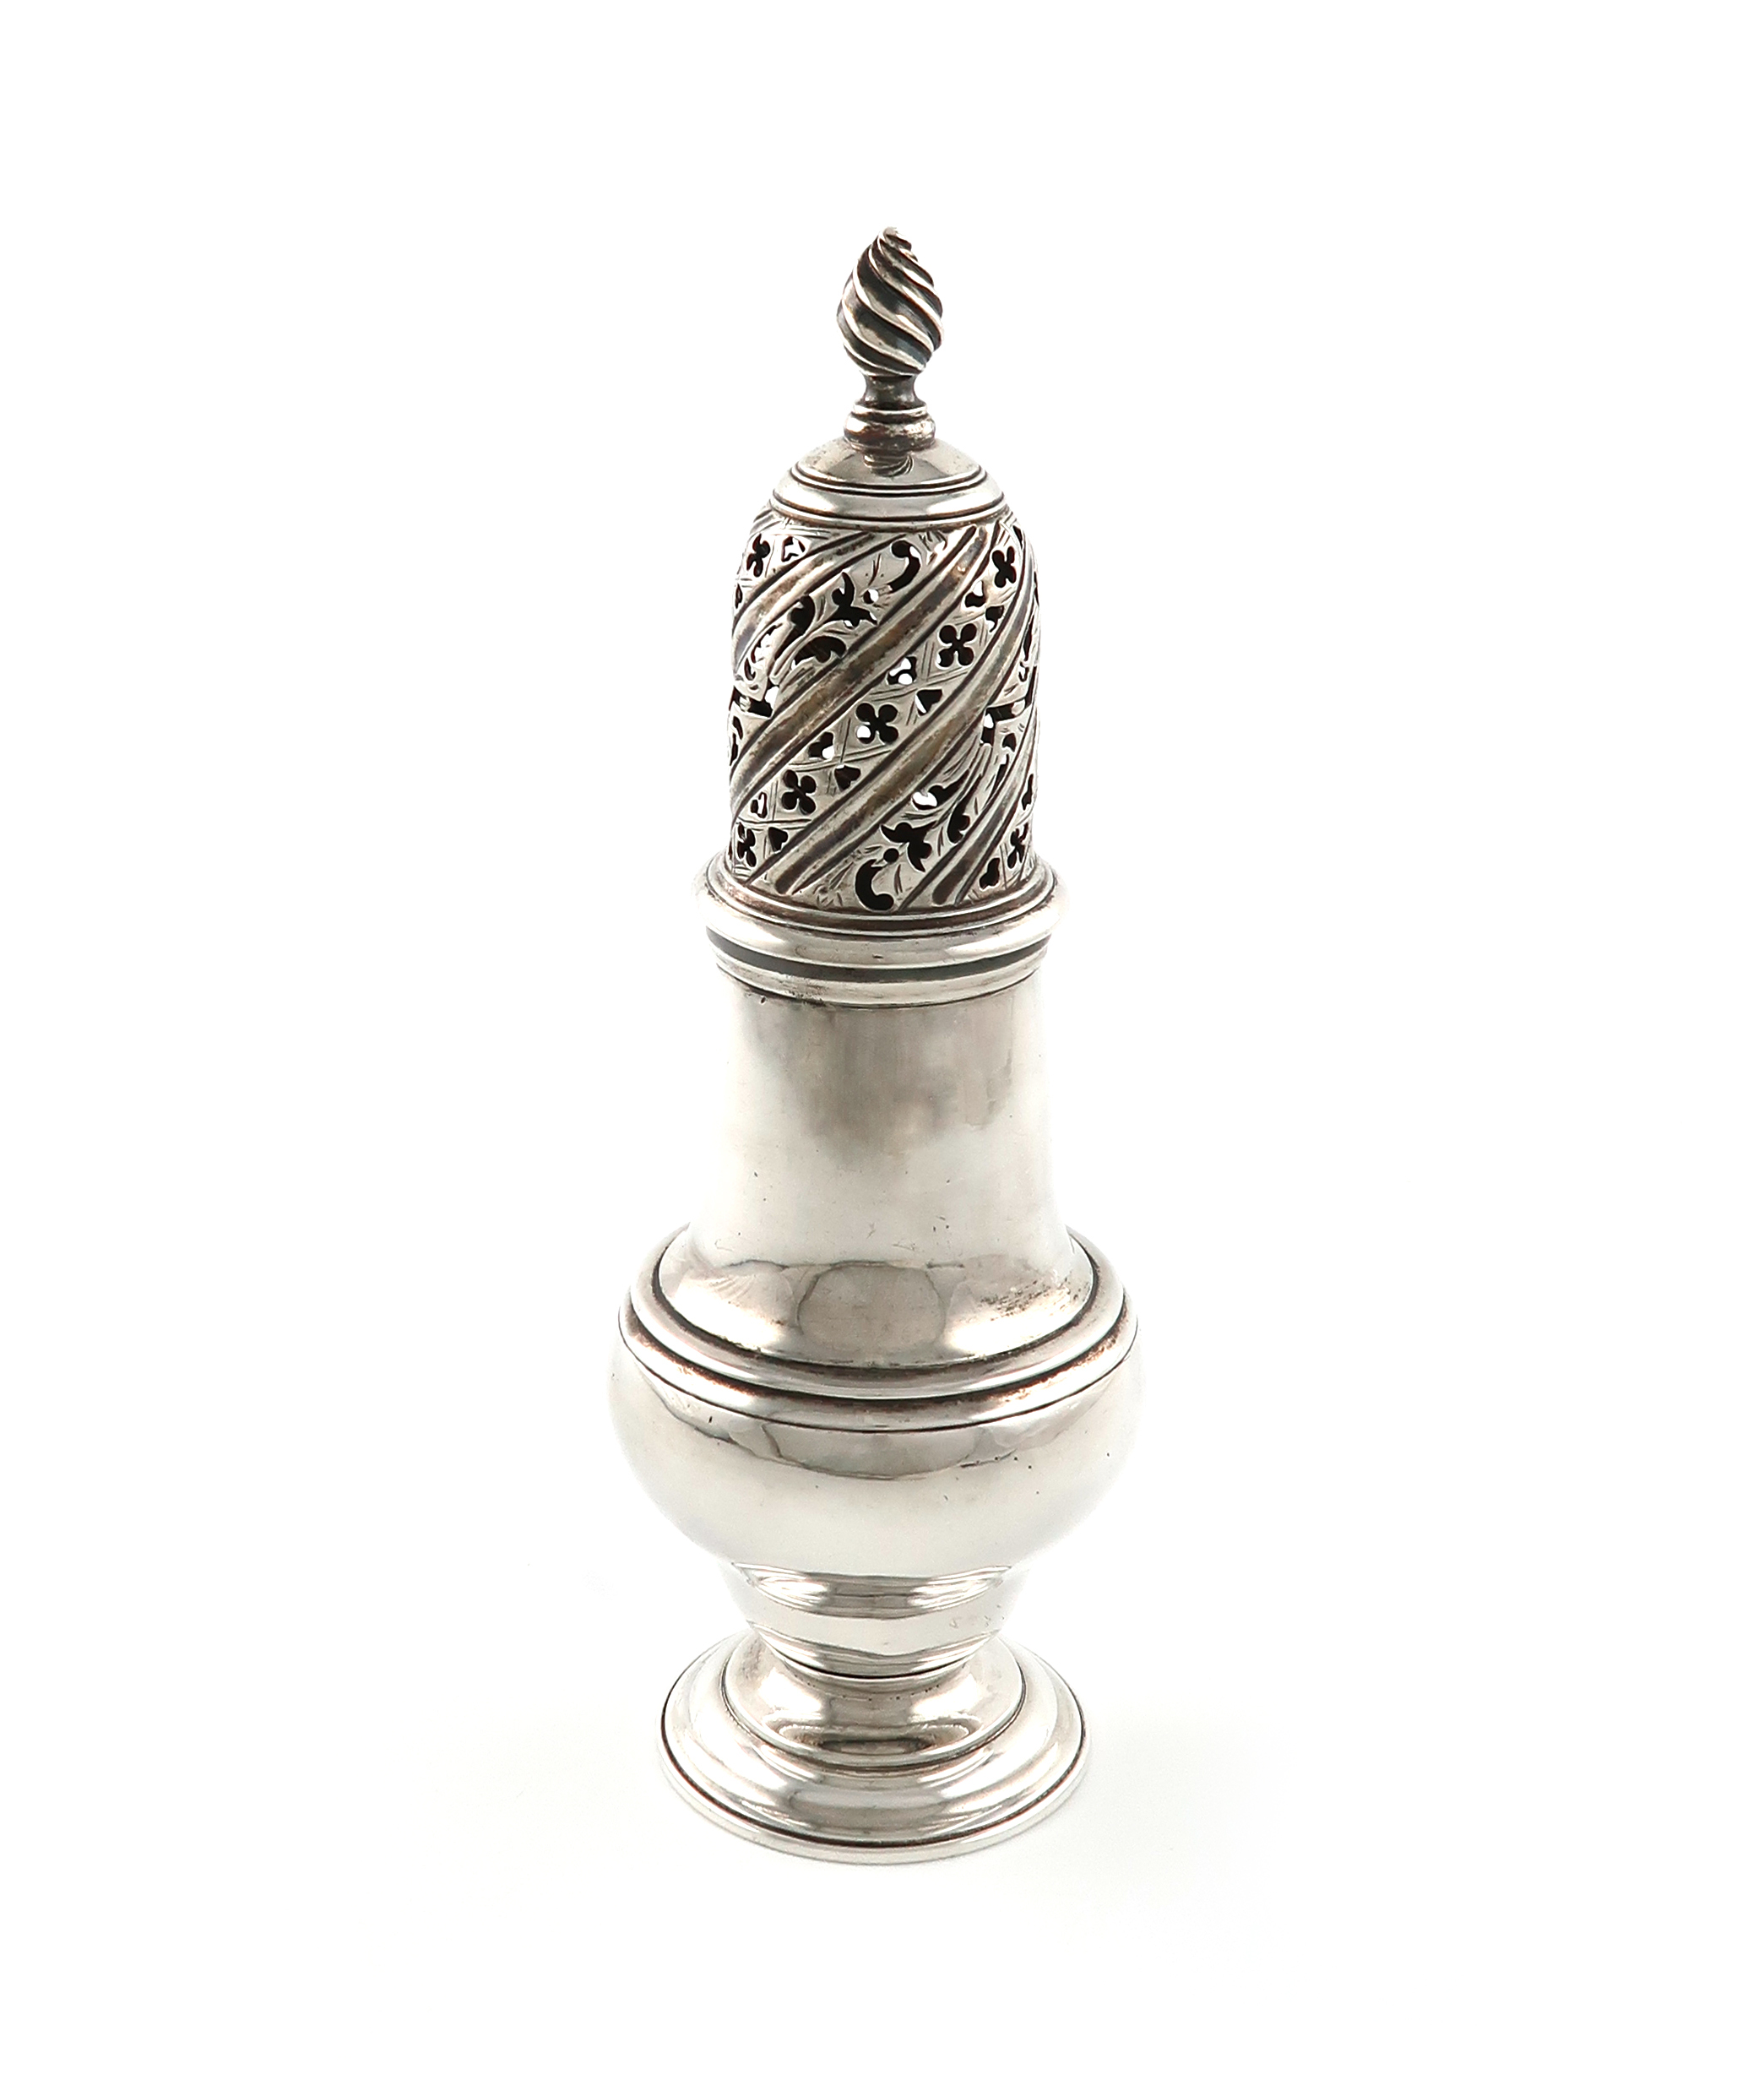 A George III silver sugar caster, by John Delmester, London 1760, baluster form, the pull-off